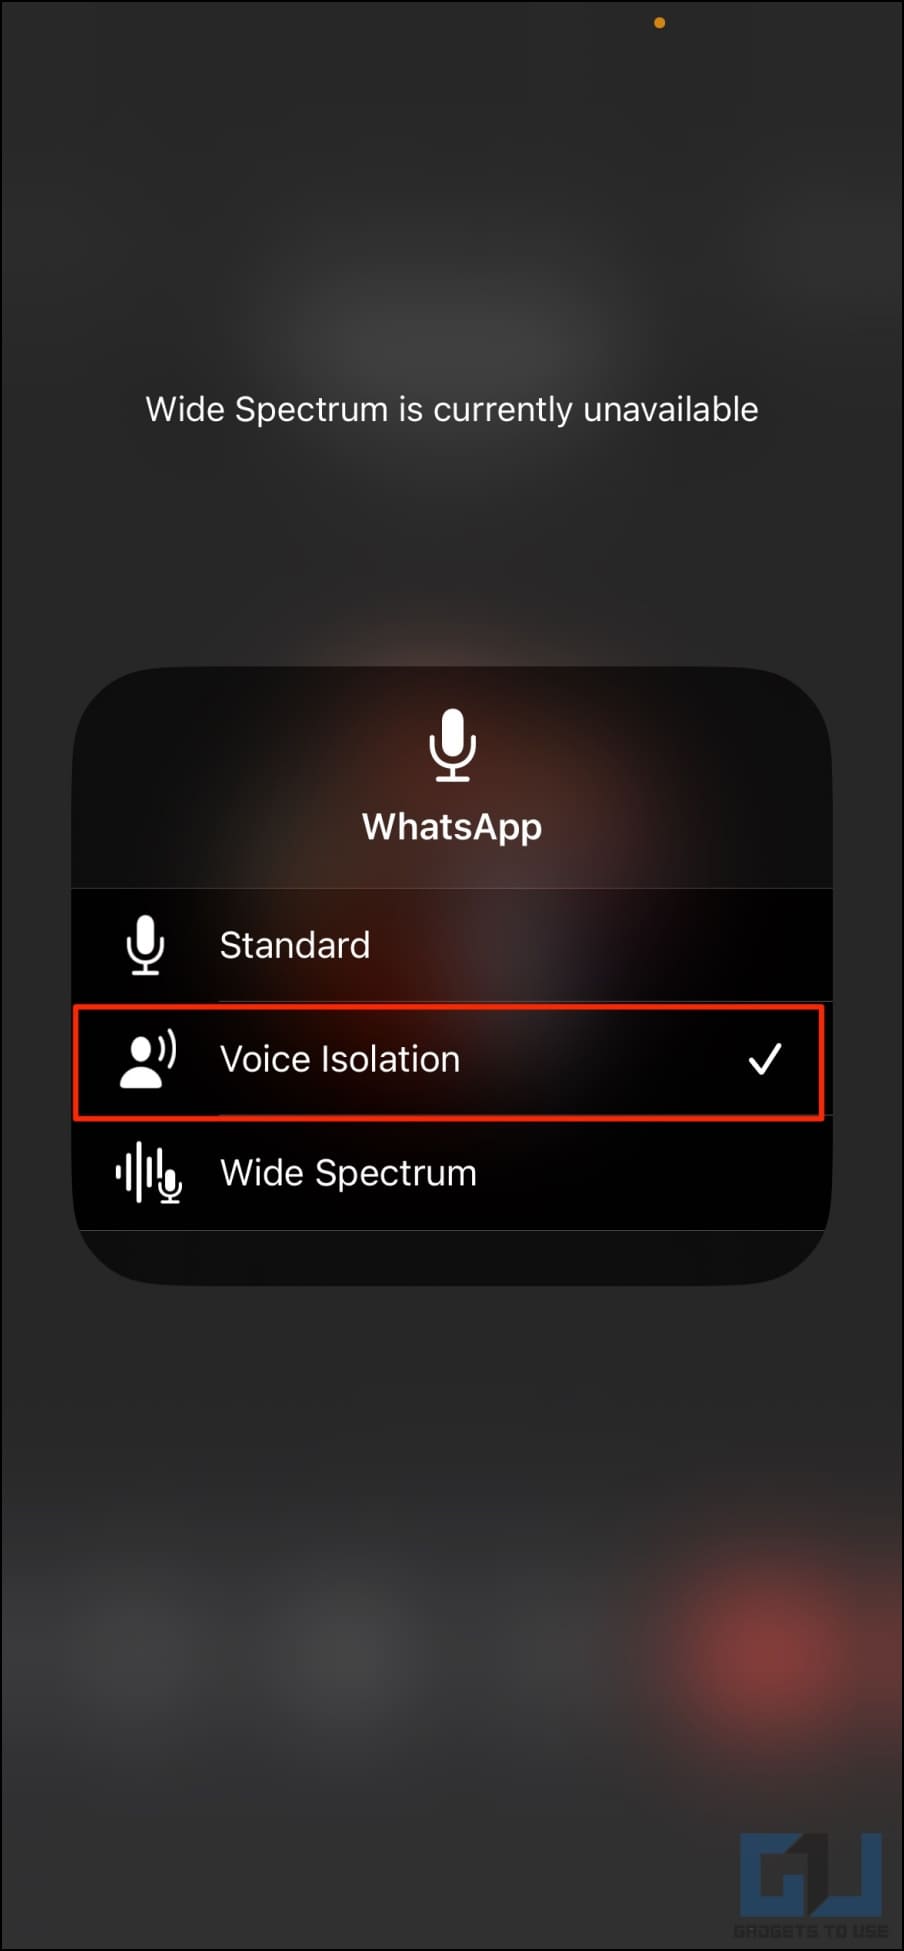 Remove noise during calls using Voice isolation on iPhone